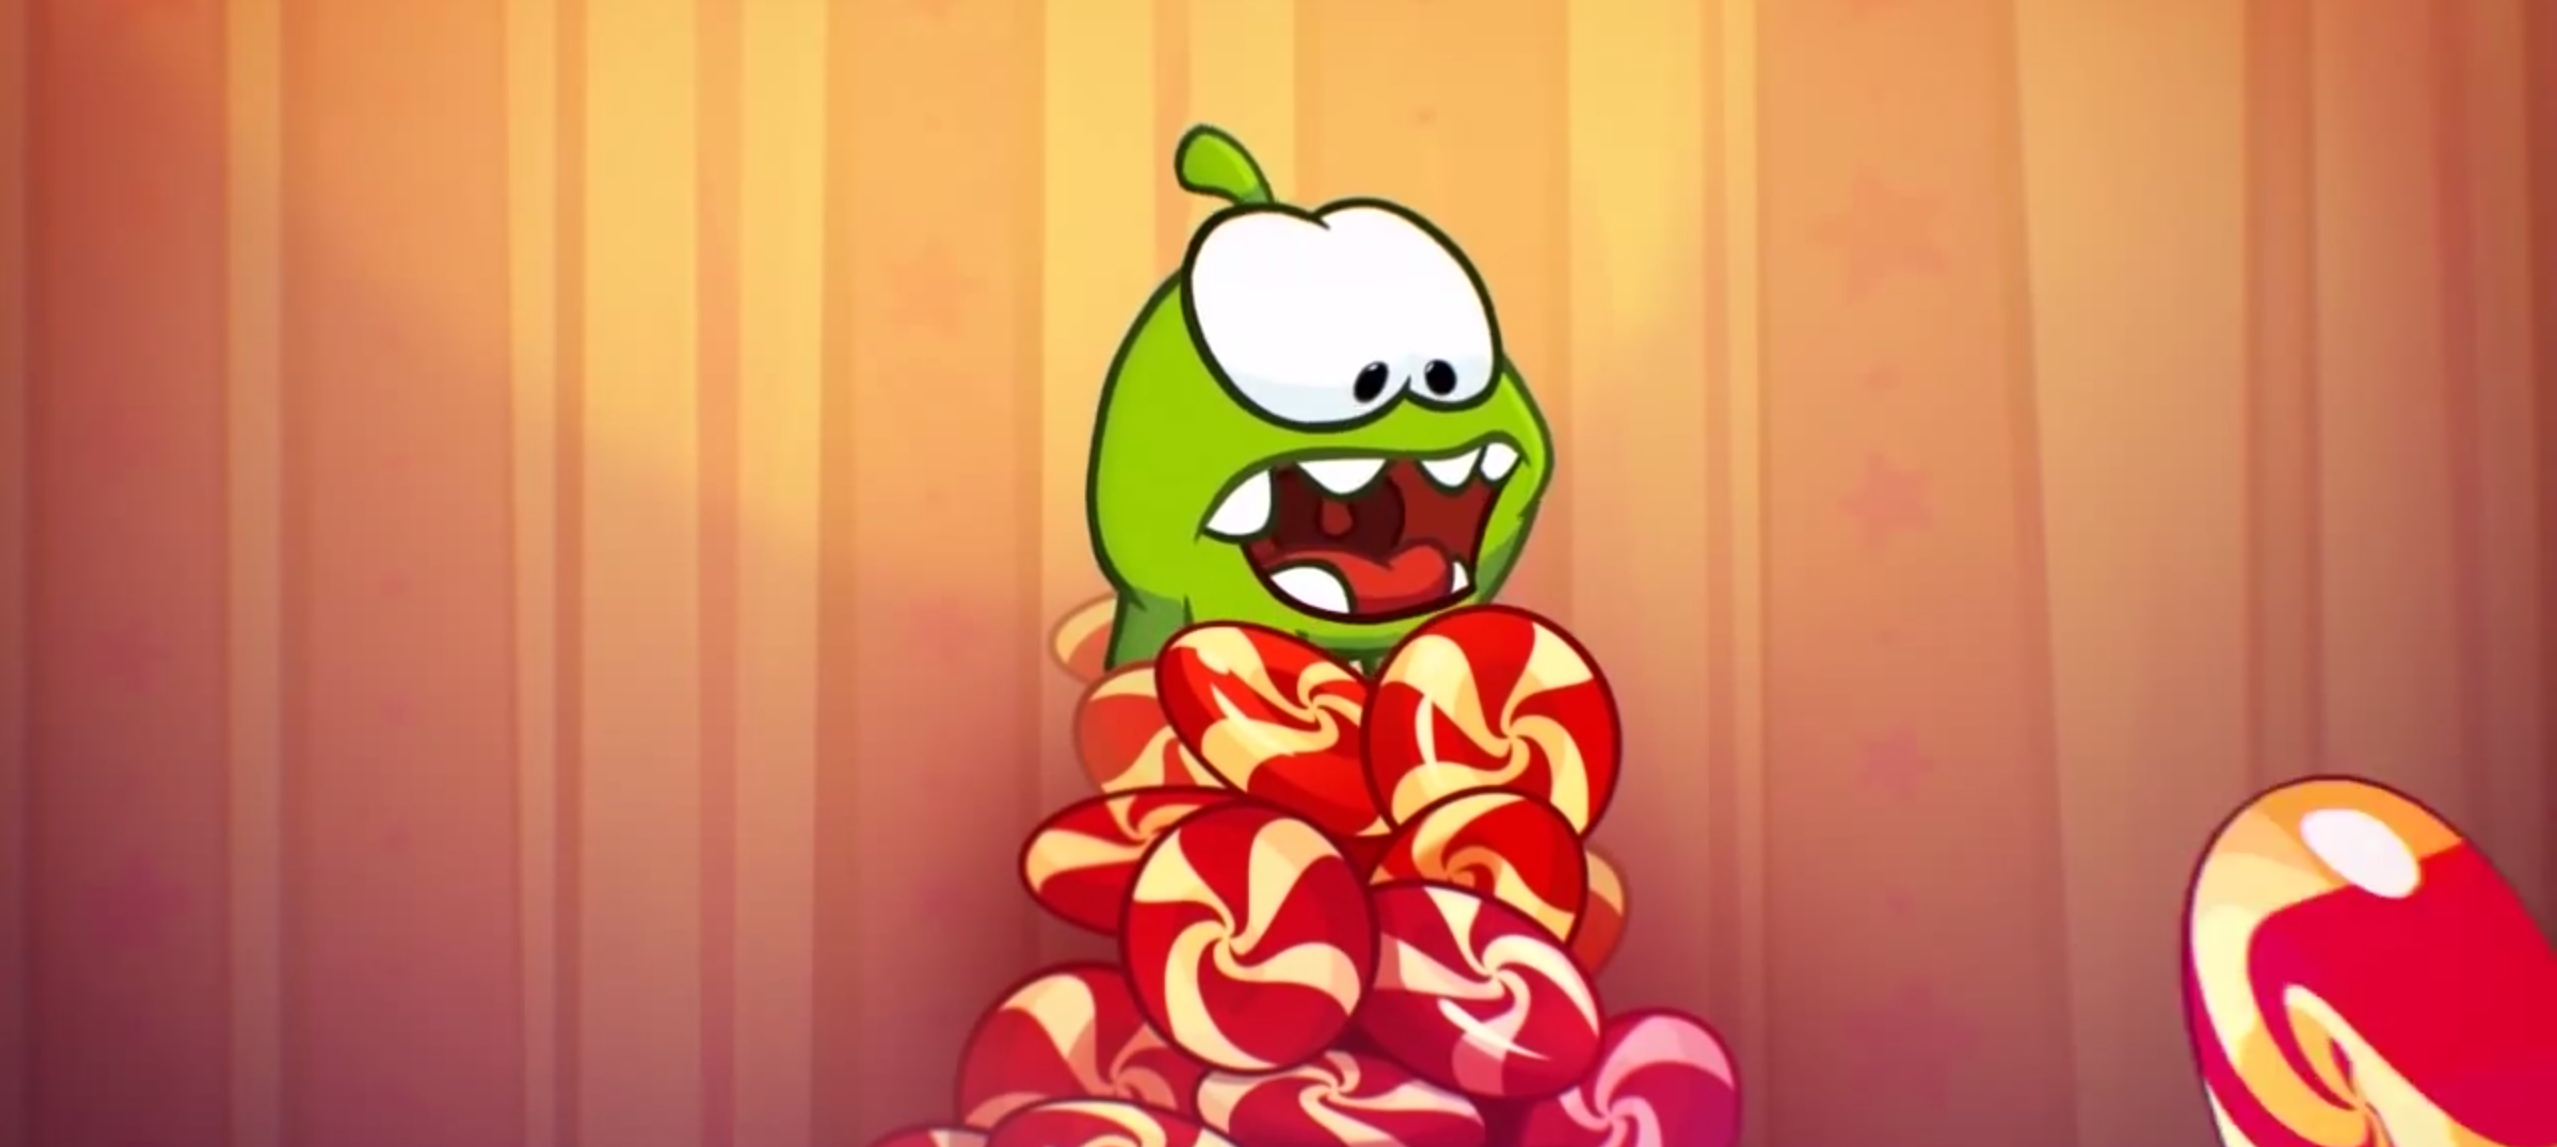 Cut the rope - 2011 - Nintendo 3DS - candy 